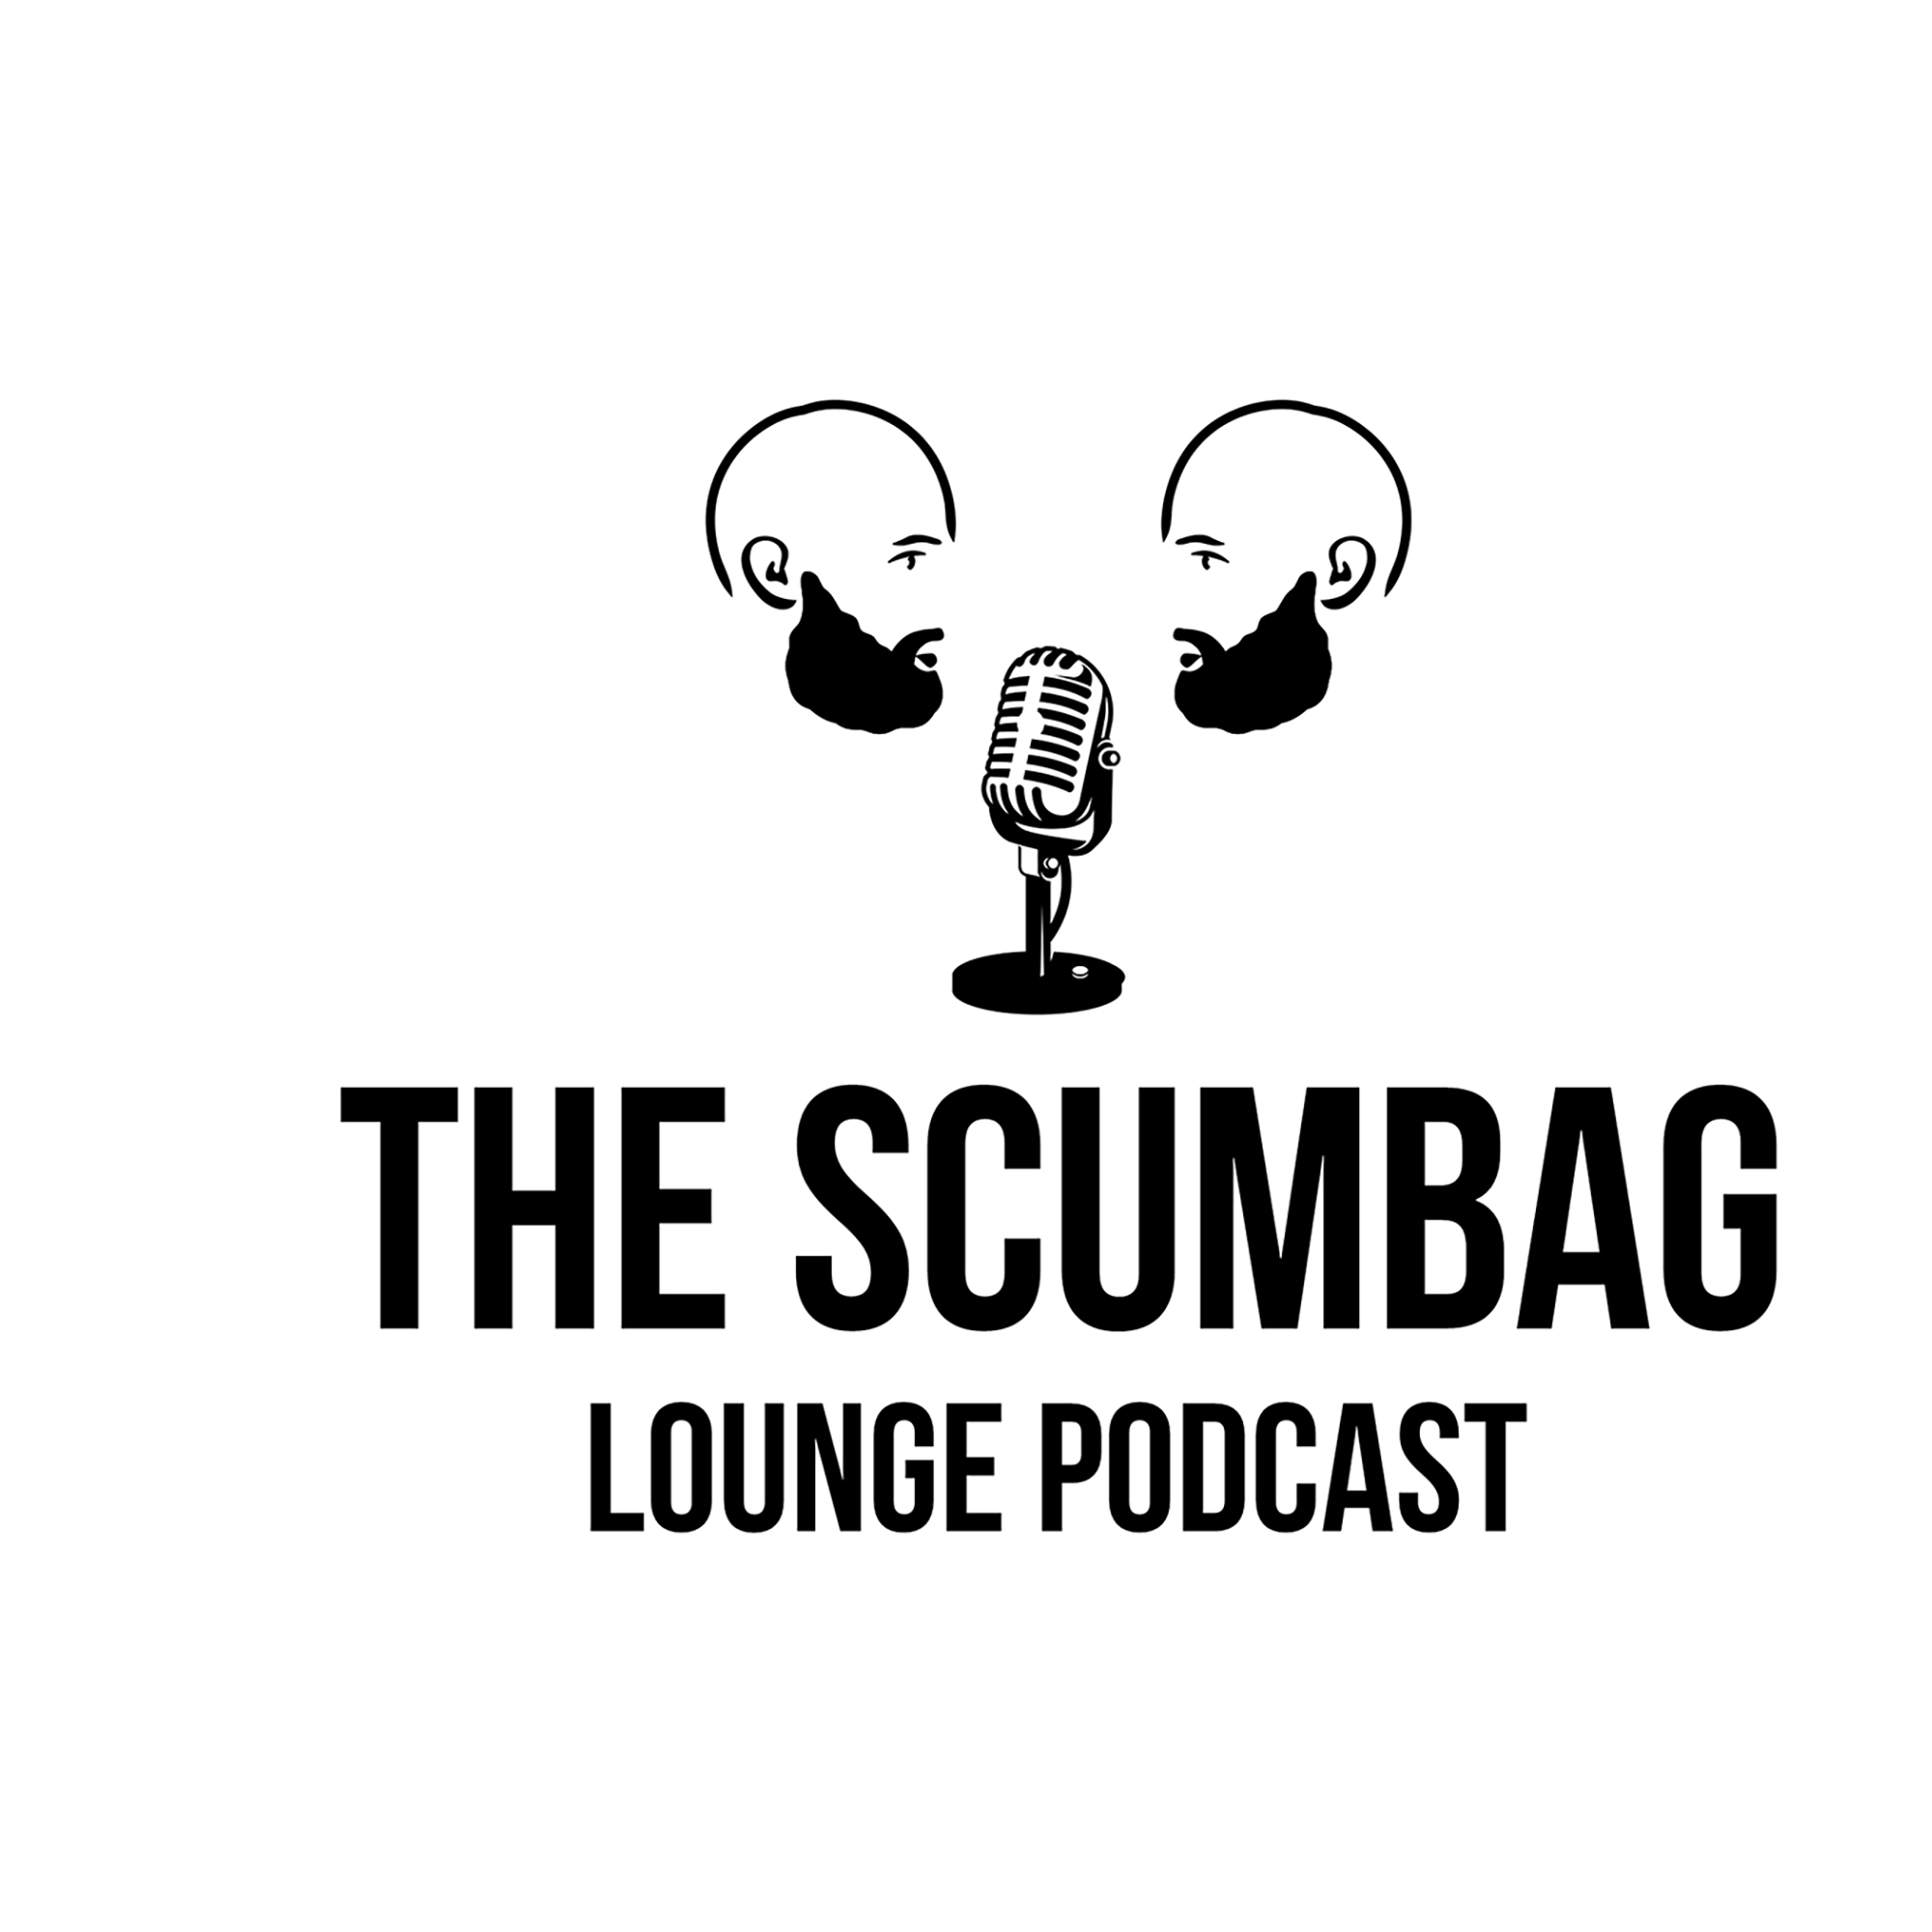 The Scumbag Lounge Podcast